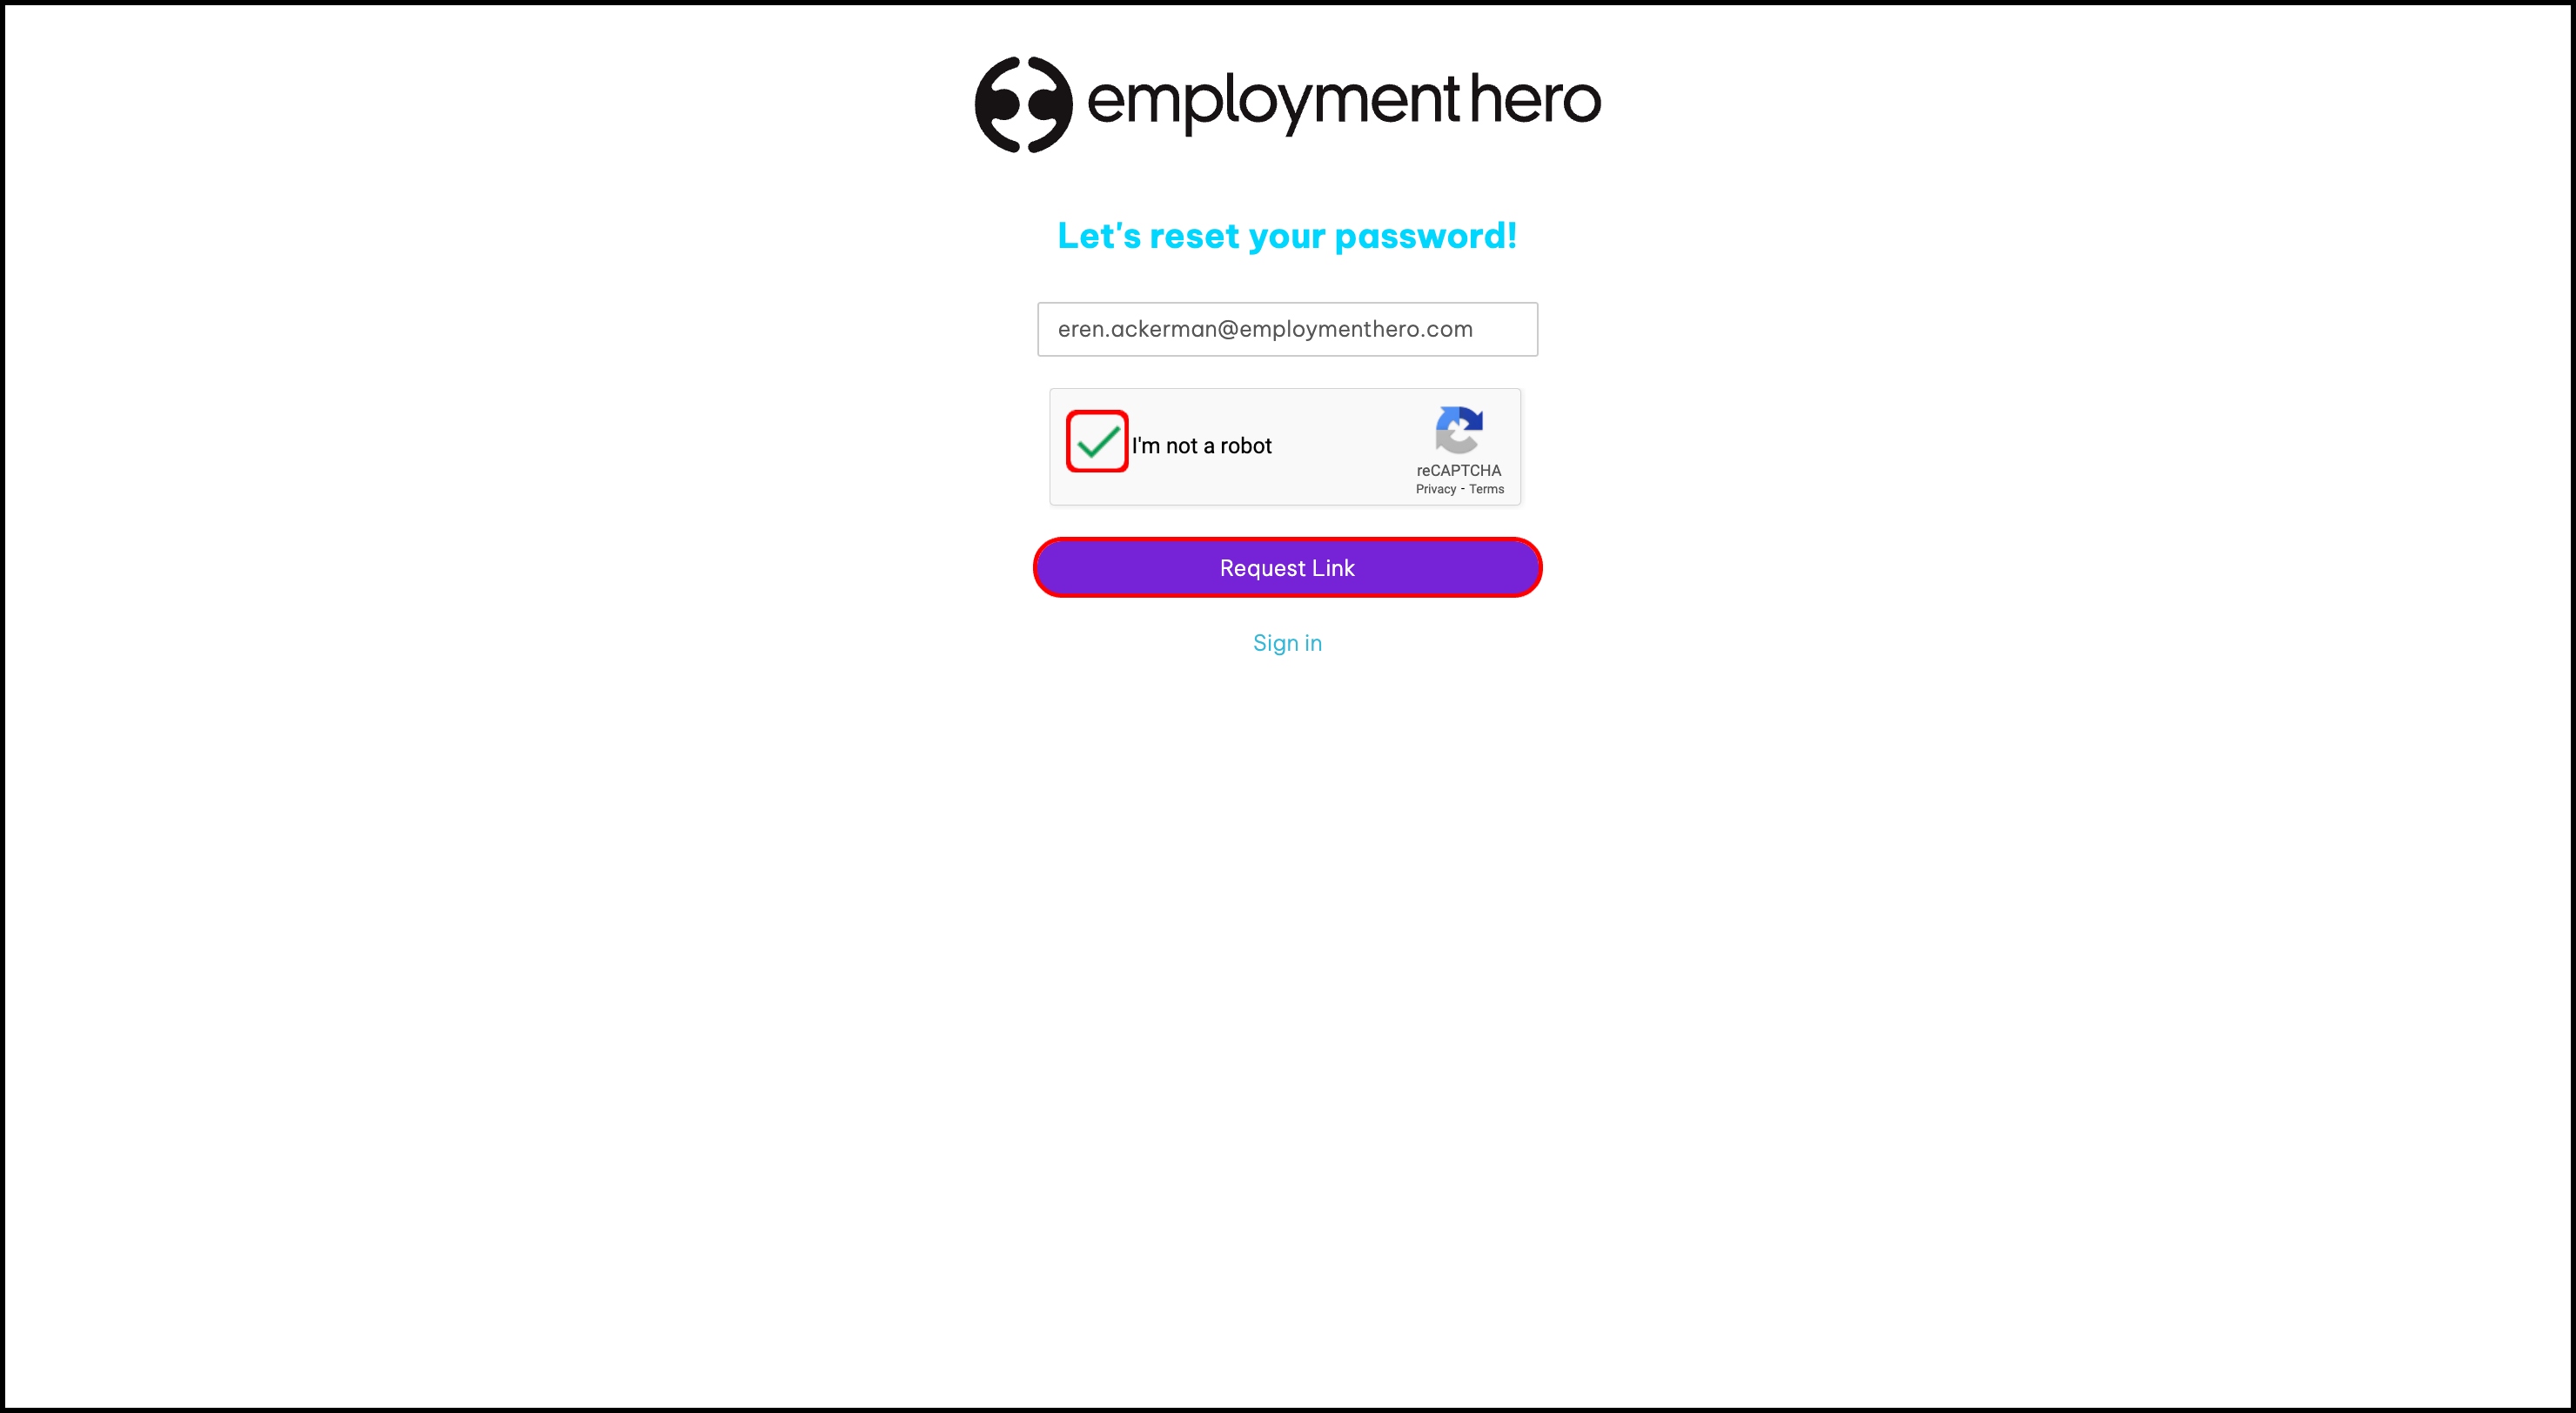 screenshot of the password reset screen, highlighting the not a robot checkbox and request link button